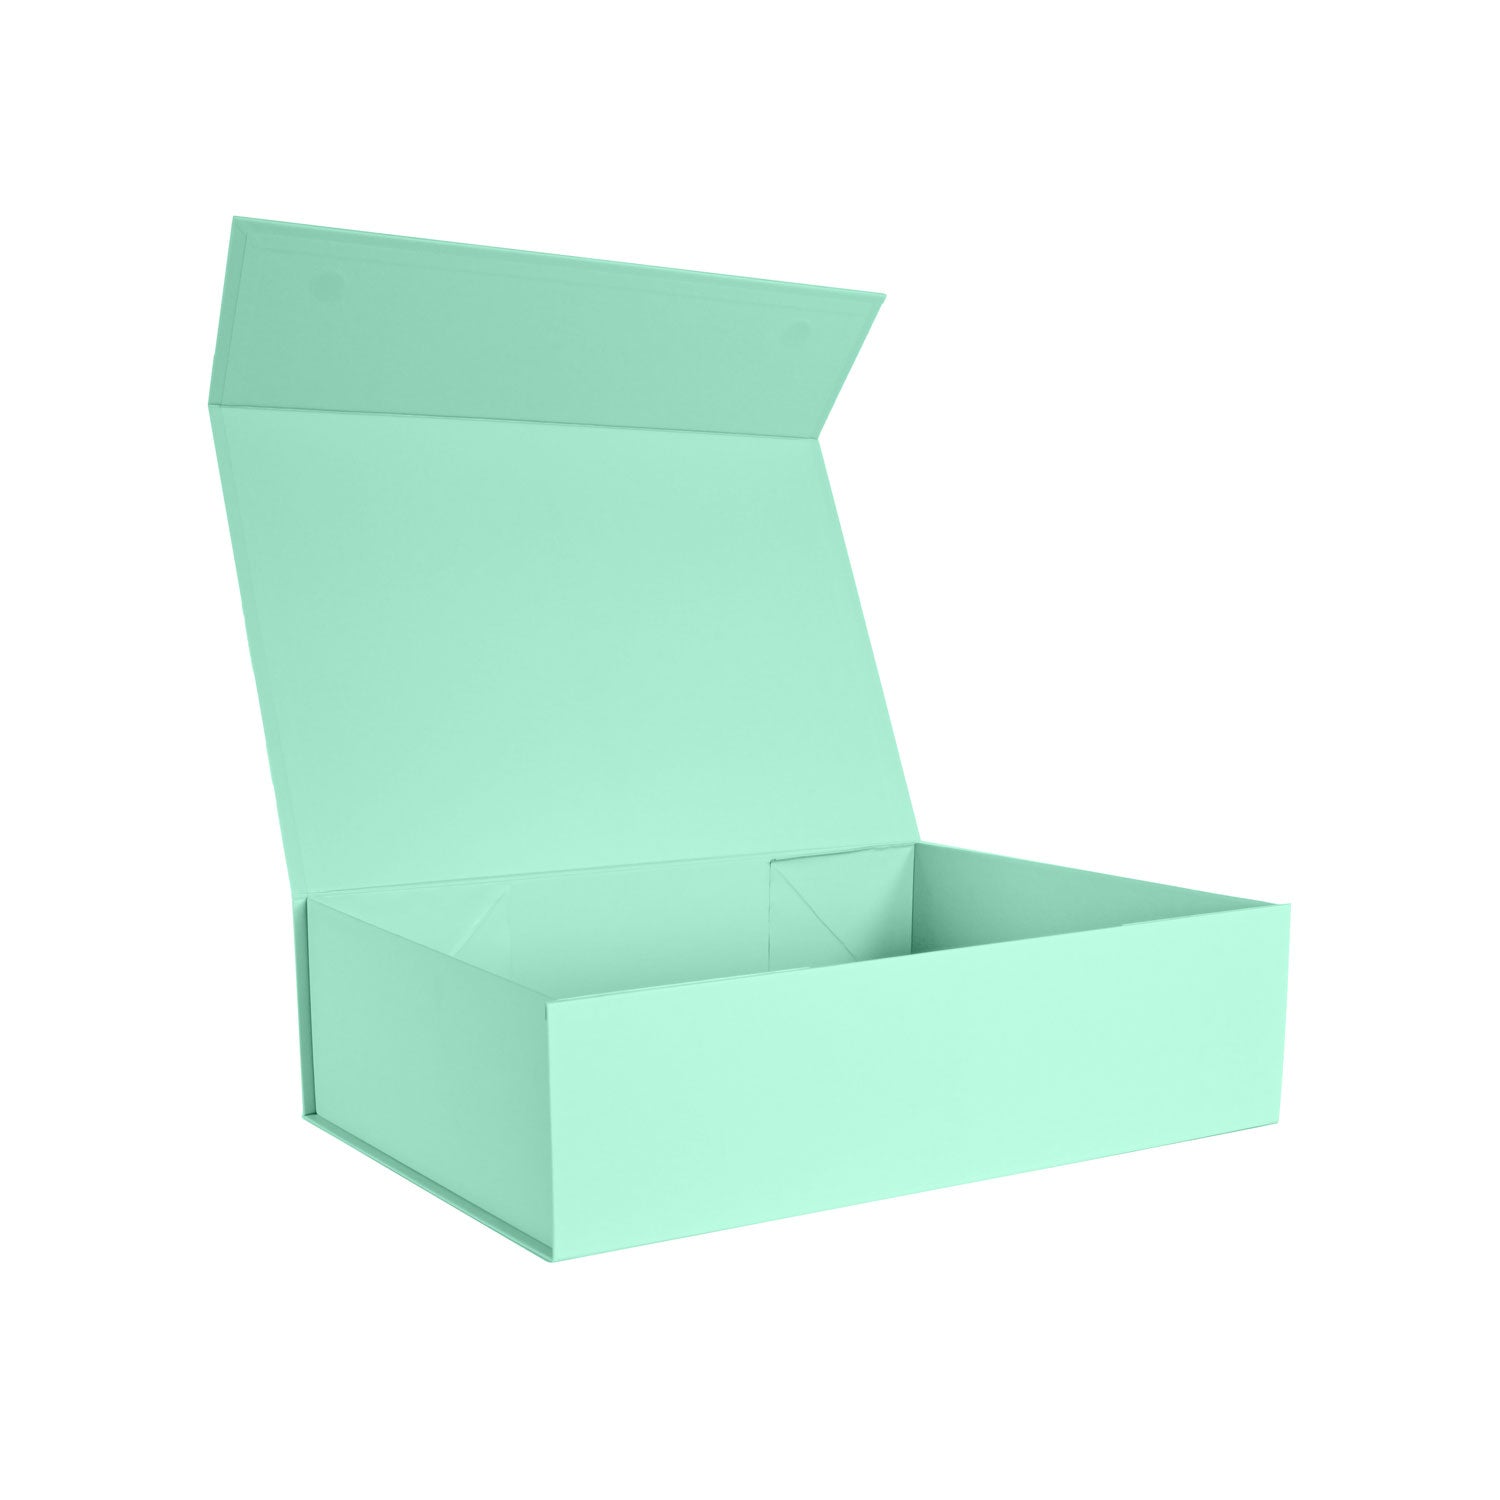 Empty Mint Green Large Gift Box - NEON Packaging